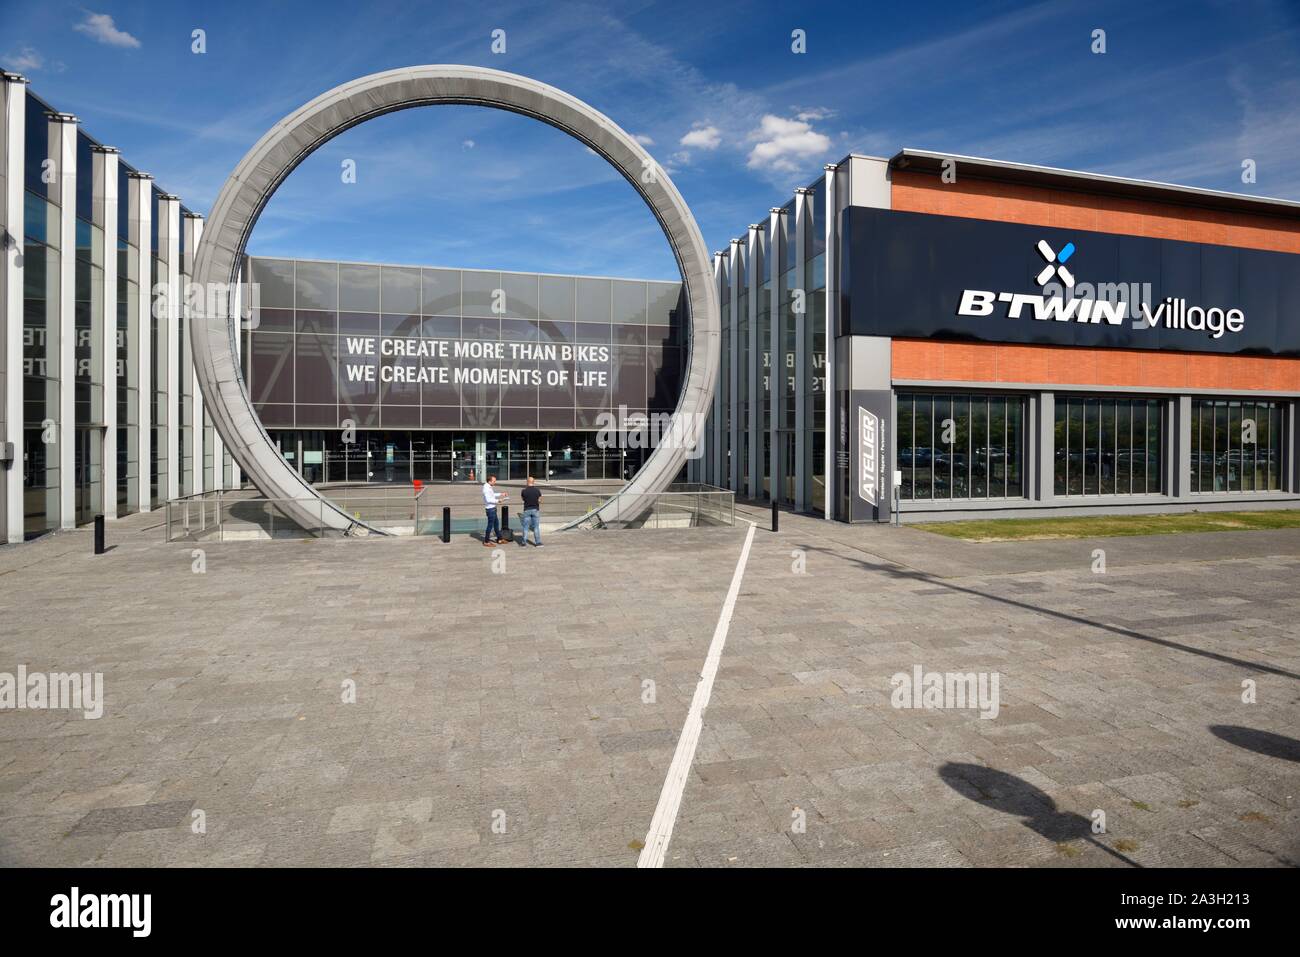 France, Nord, Lille, BTWIN Village store of the Decathlon brand, dedicated to Decathlon brand bicycles including Rockrider and others and housing the manufacturing plant, workshops, and a shop Stock Photo